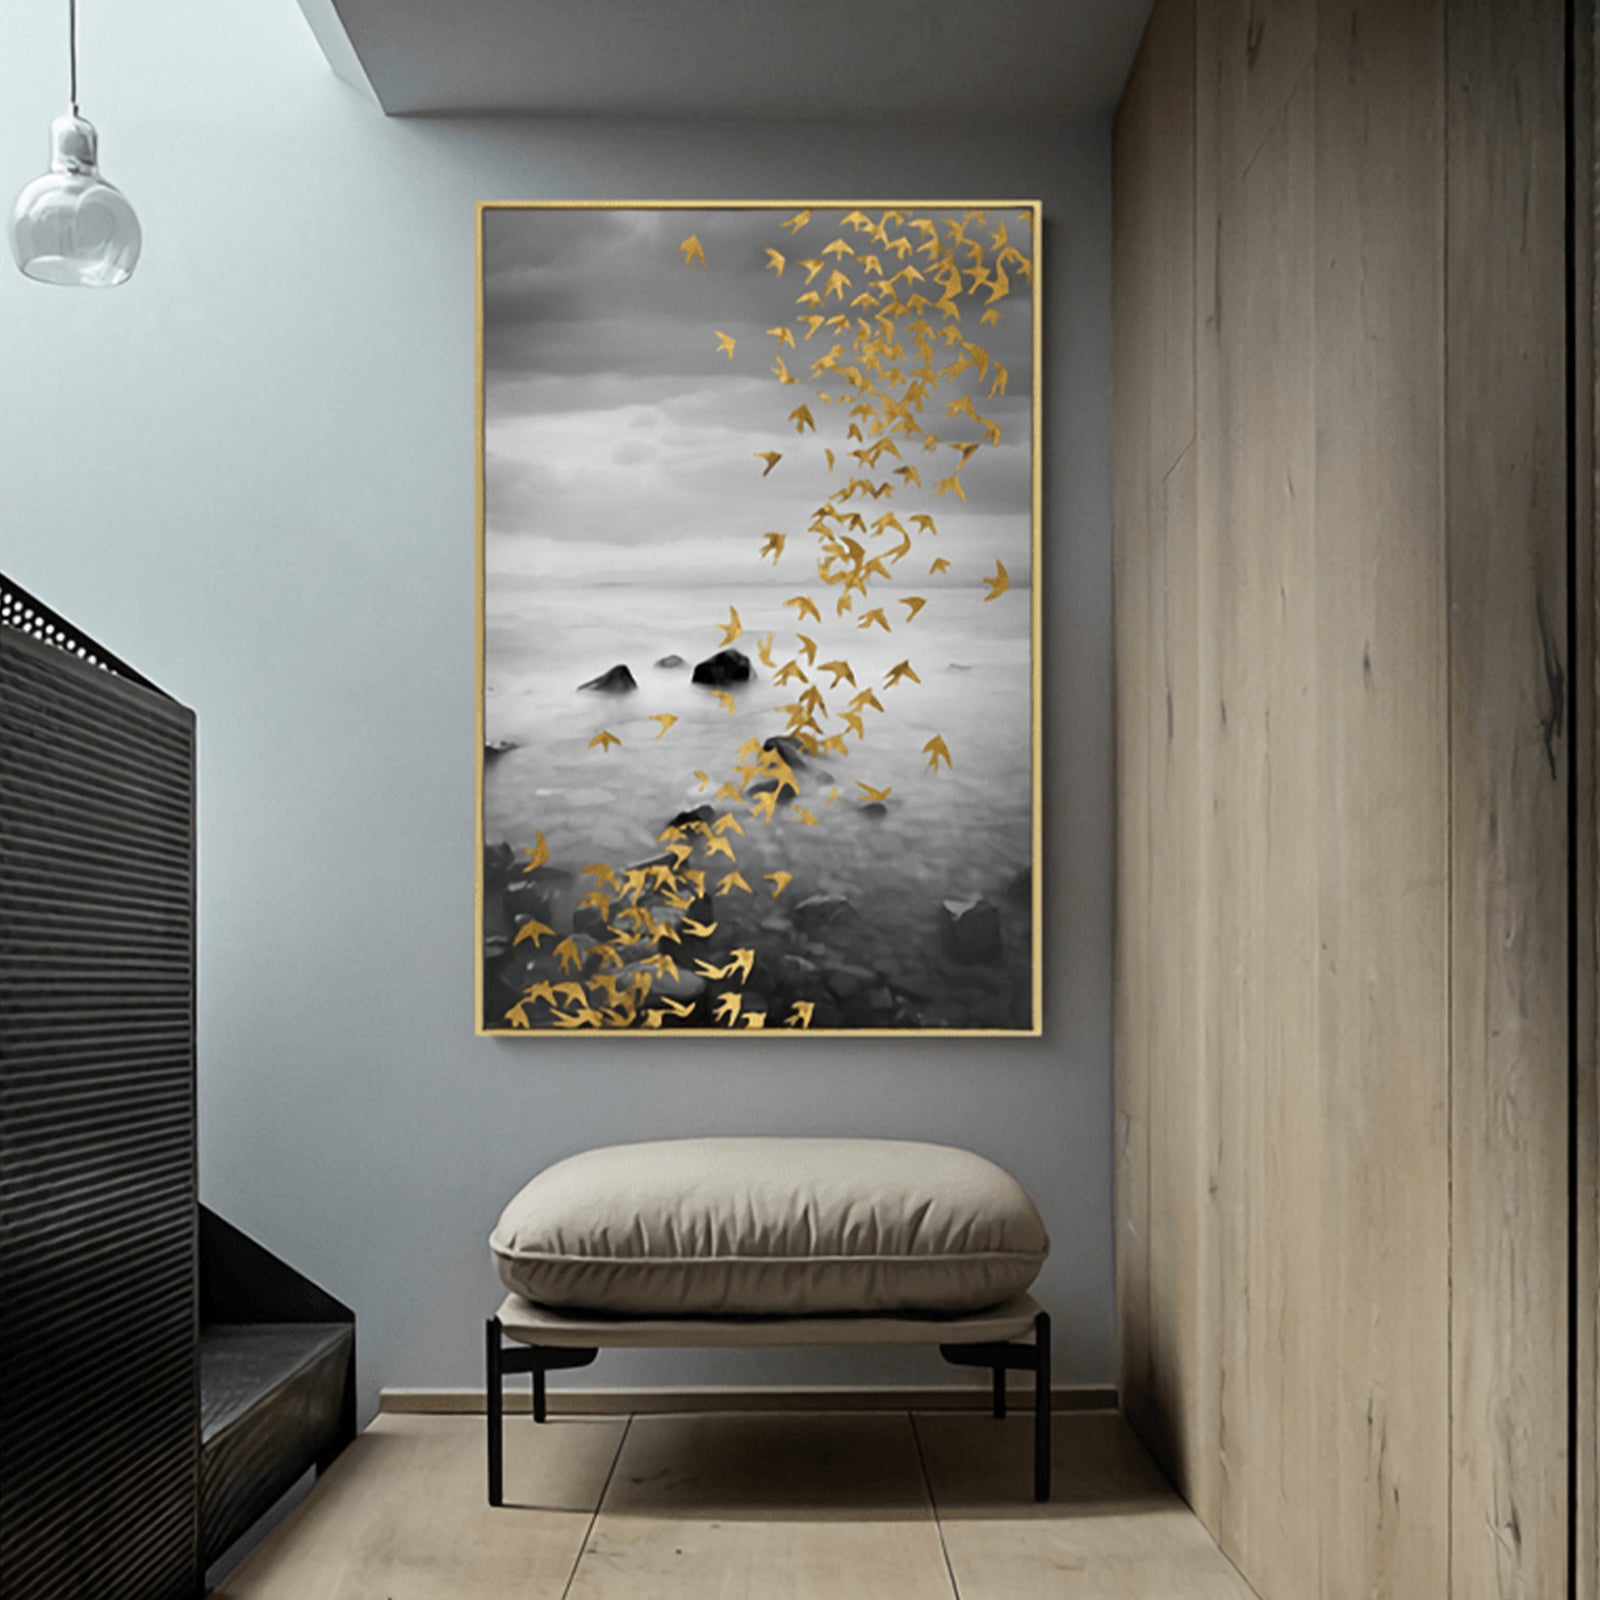 VOFFOV® Birds Flying On Lake Wall Art for Stair Wall